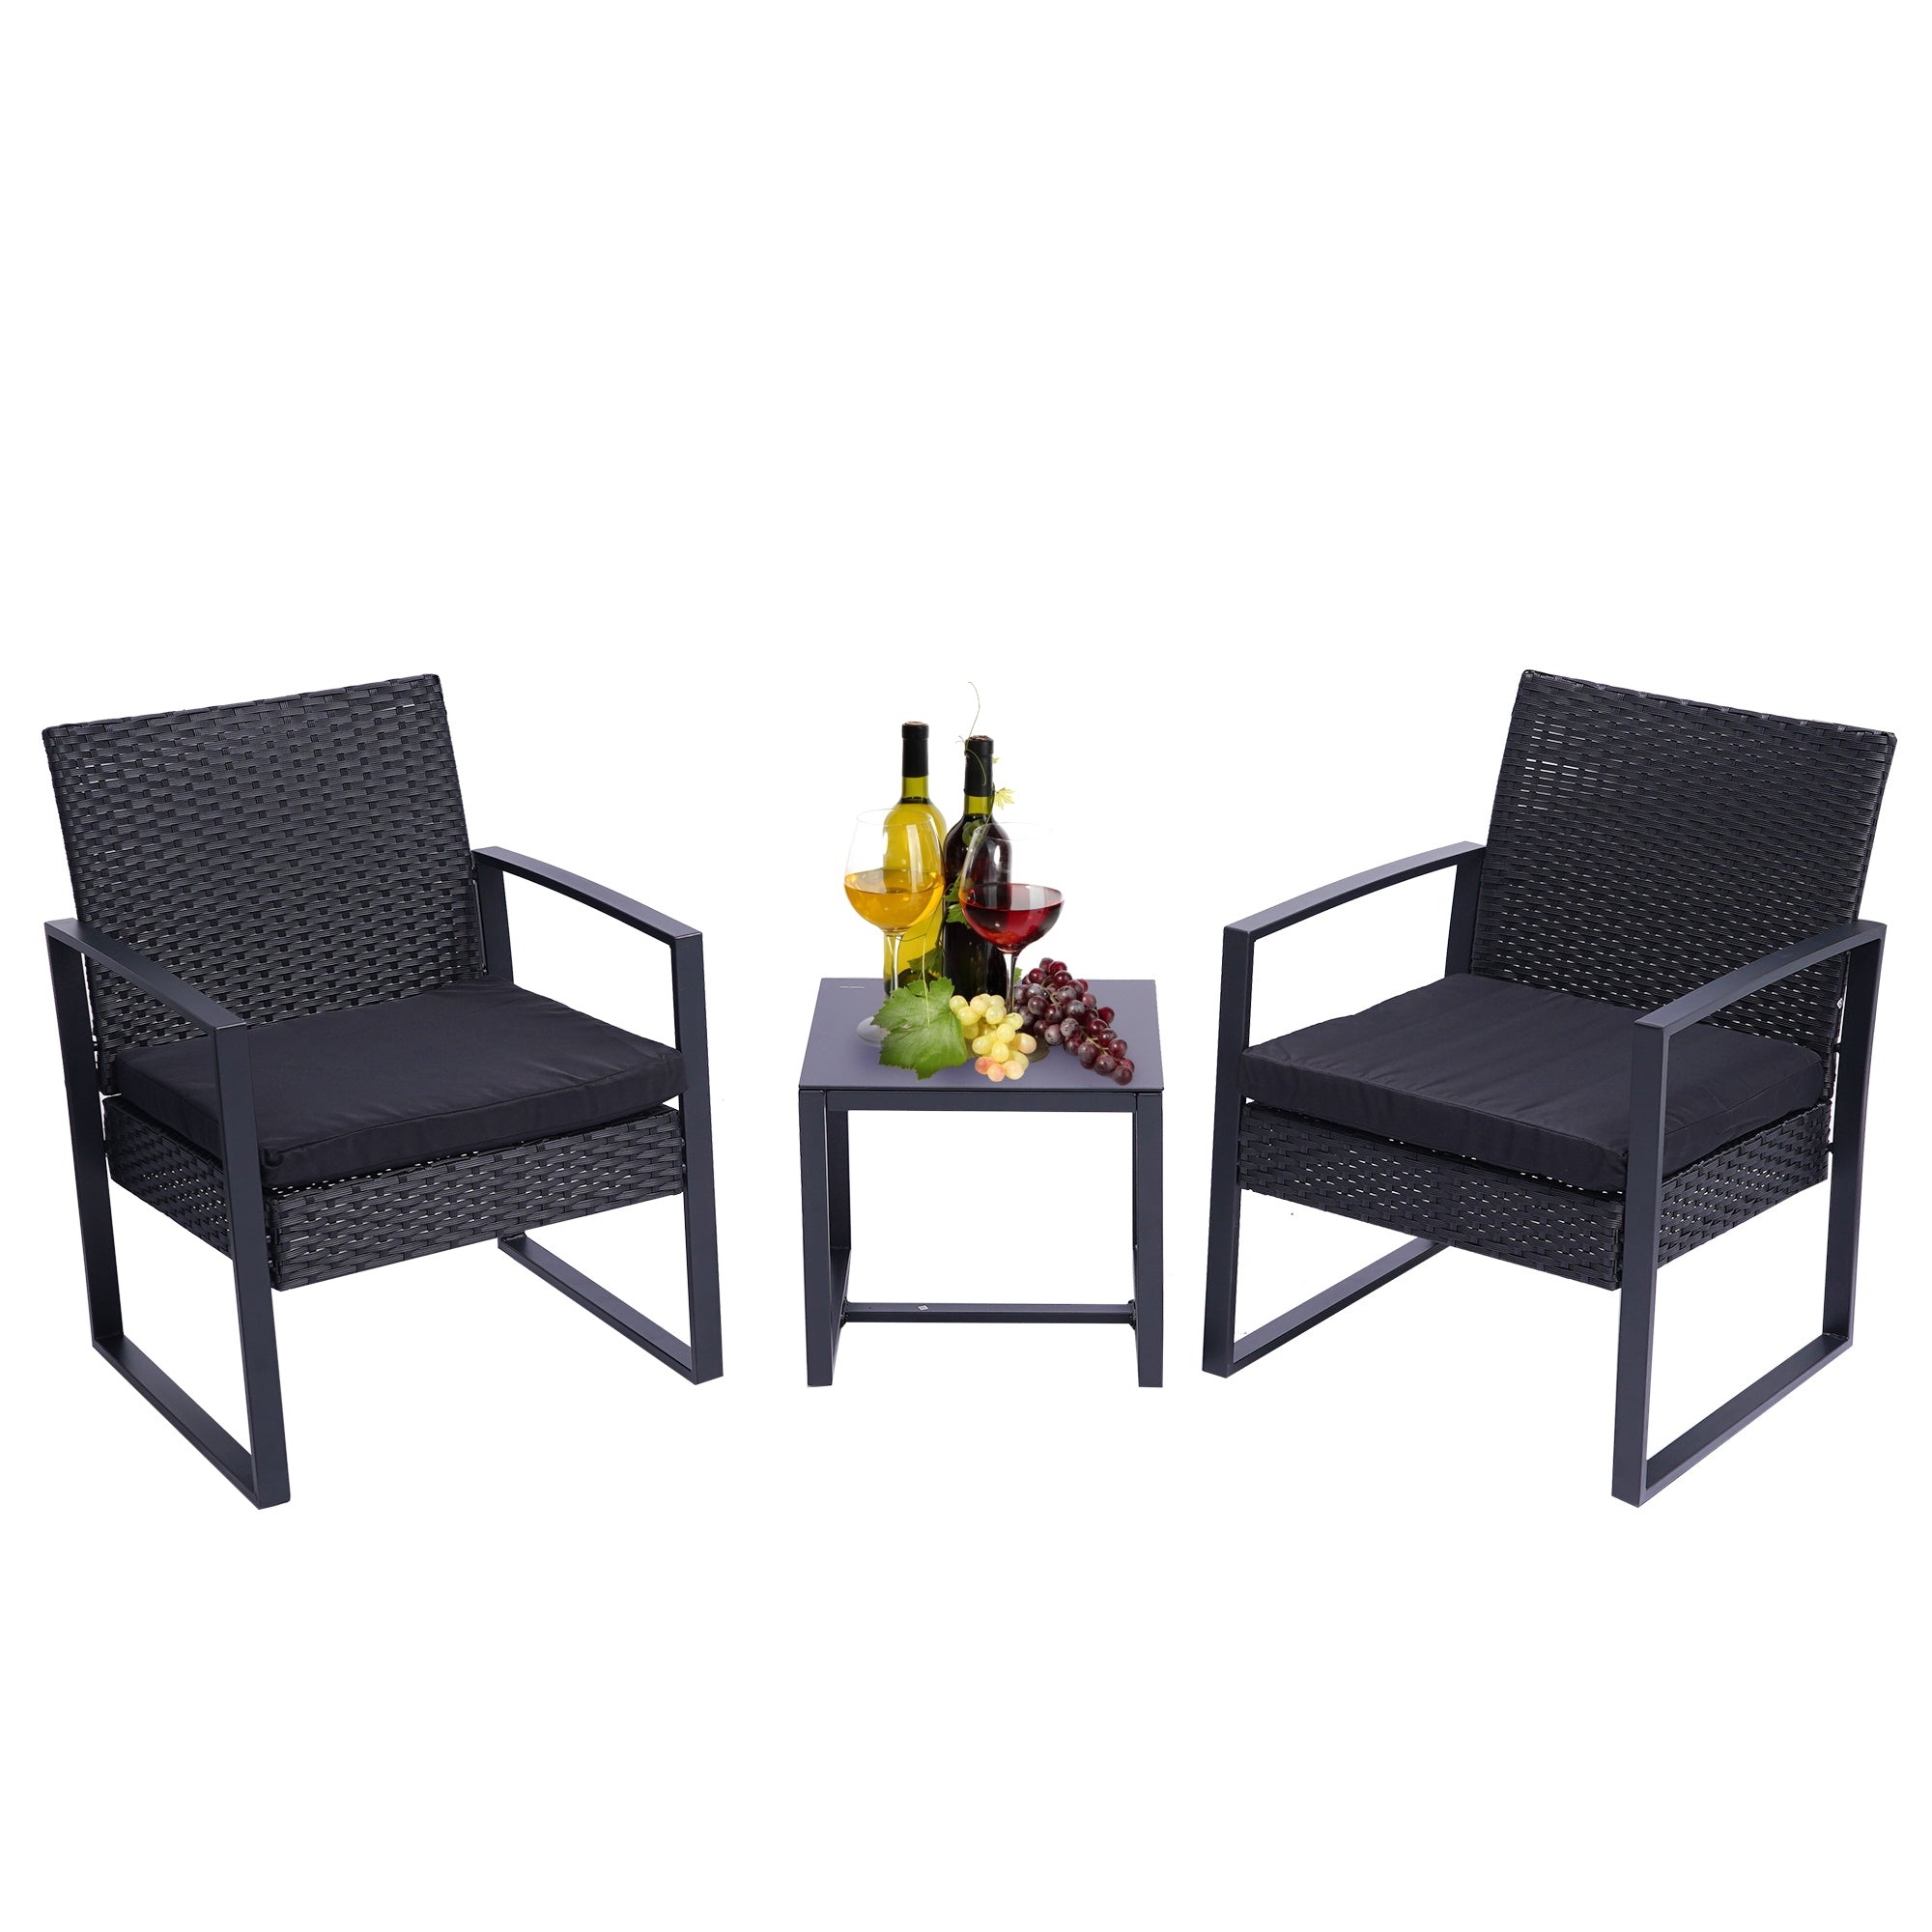 3 Pieces Patio Set Outdoor Wicker Patio Furniture Sets Rattan Chair Conversation Sets with Coffee Table,Black-Boyel Living